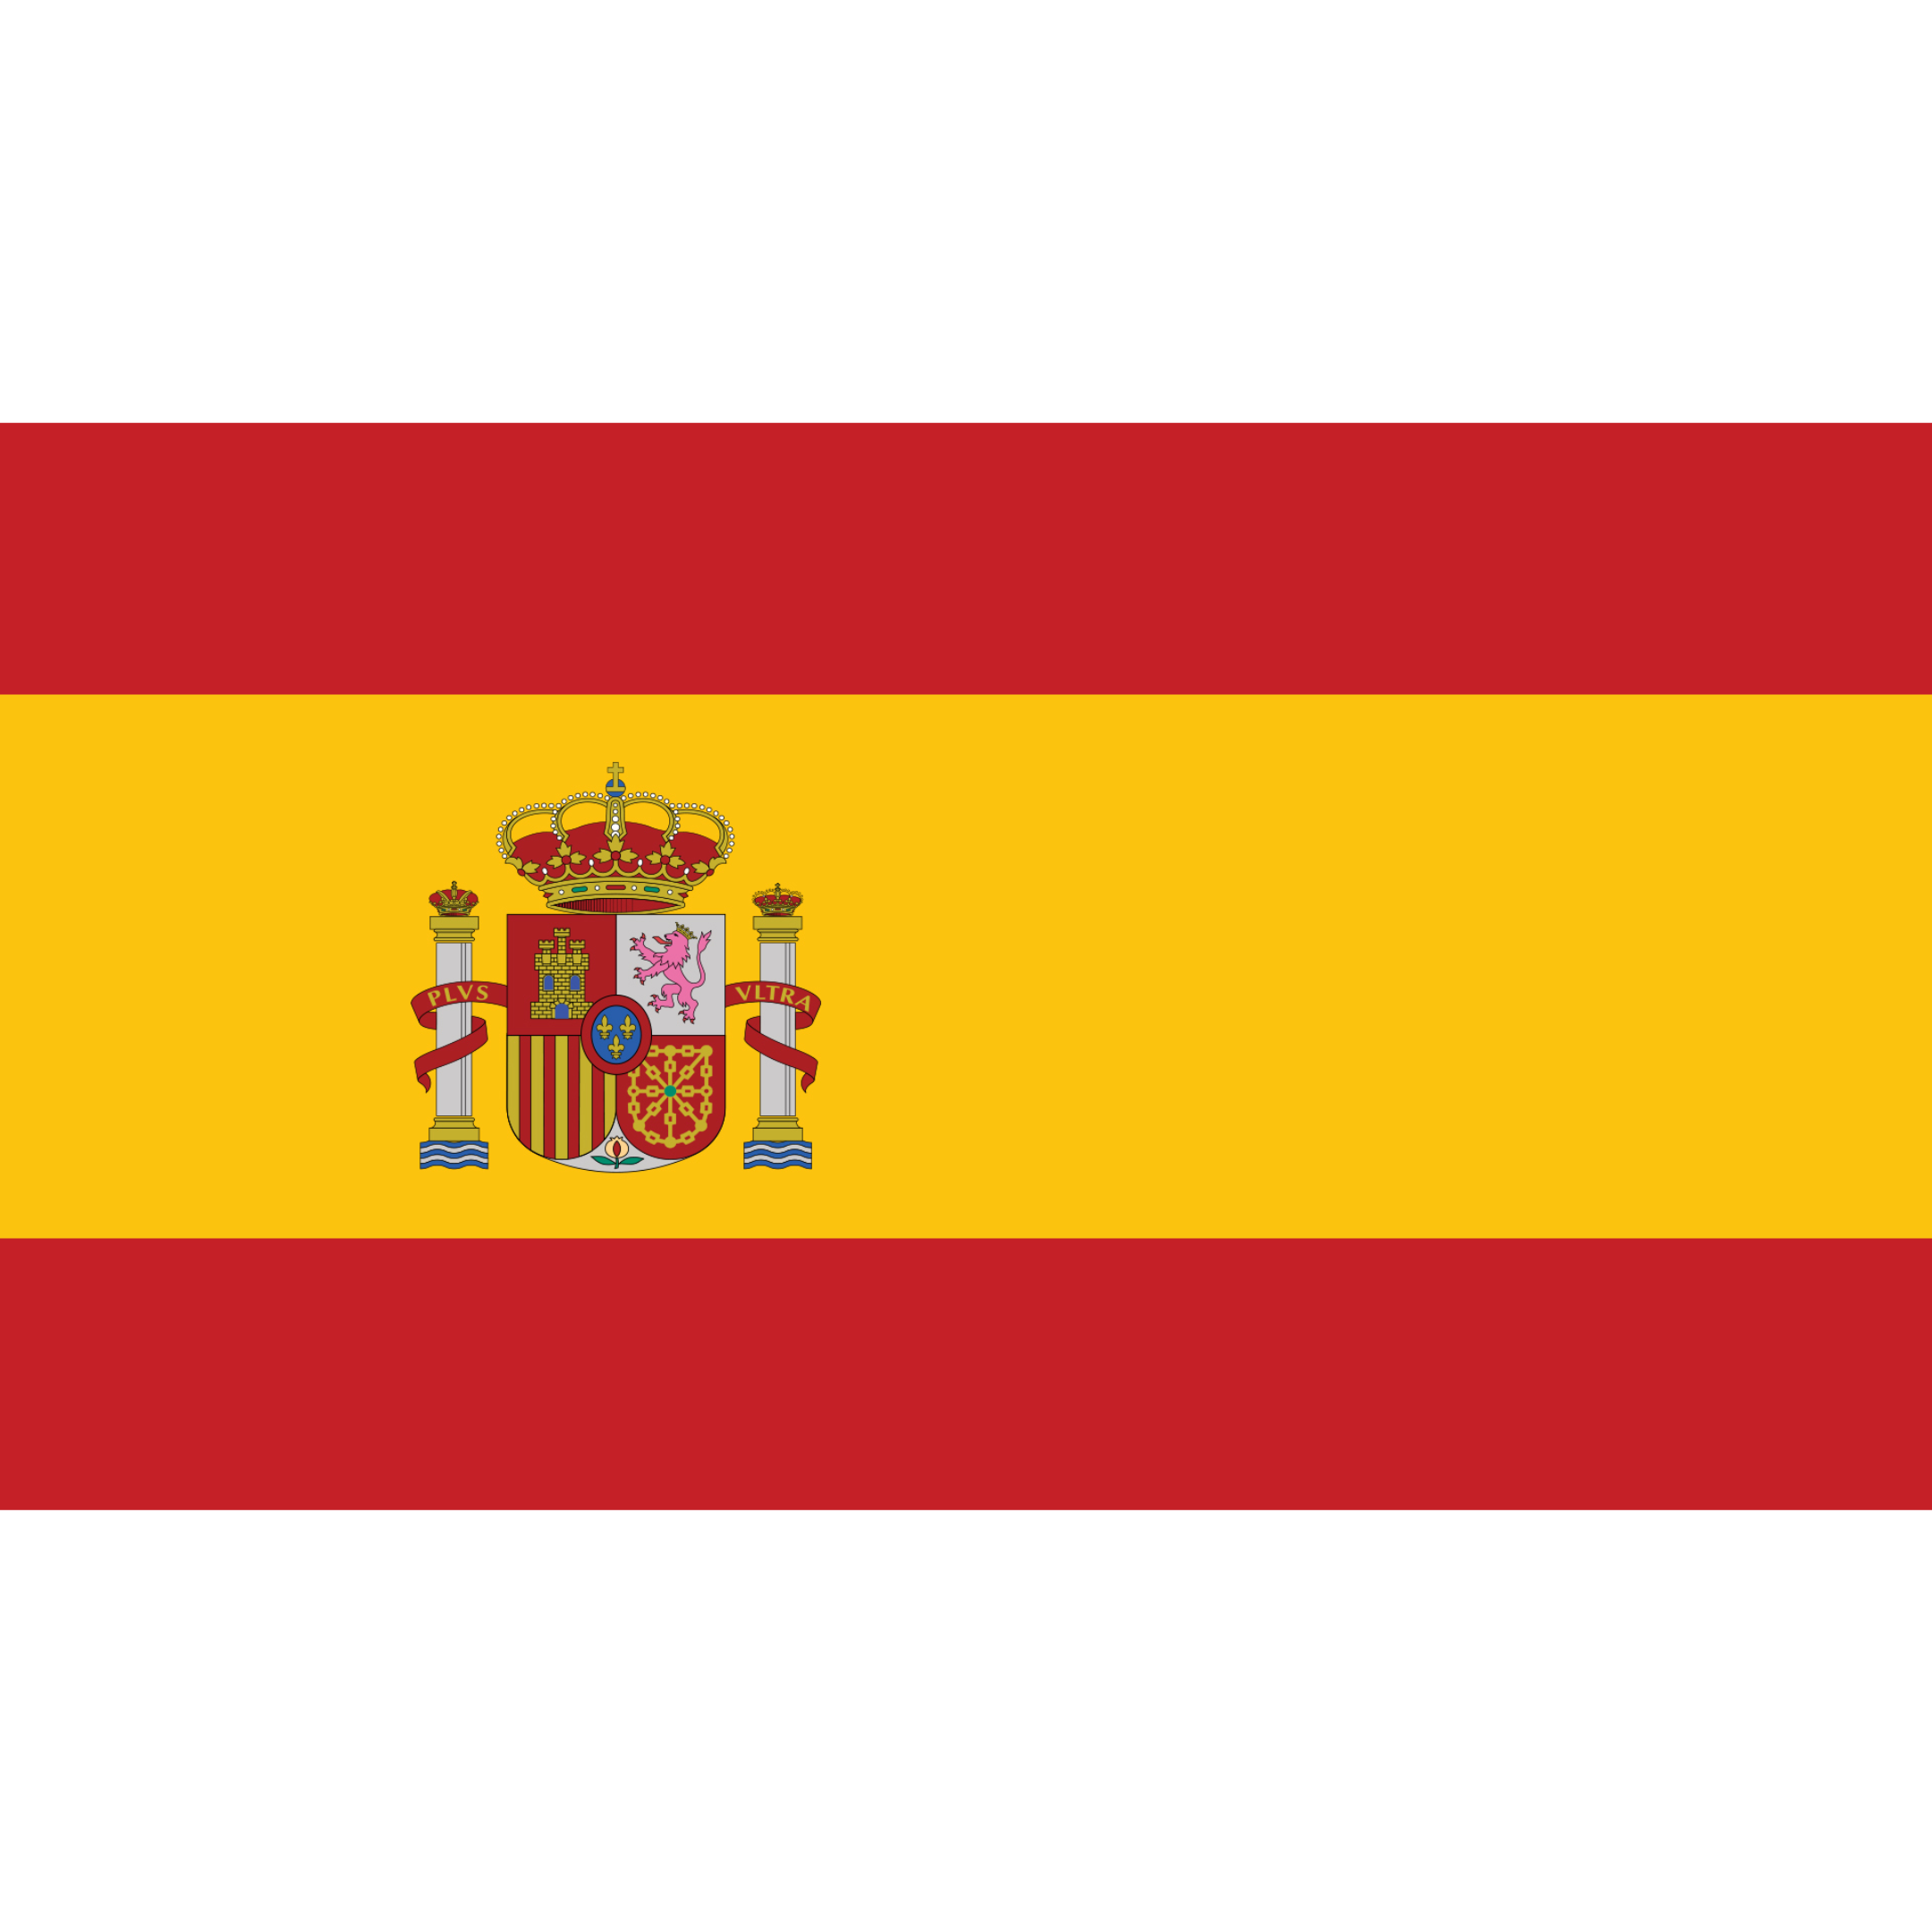 The Spanish flag has three horizontal bands in yellow (double width) and red, with a coat of arms off-centre to the left.